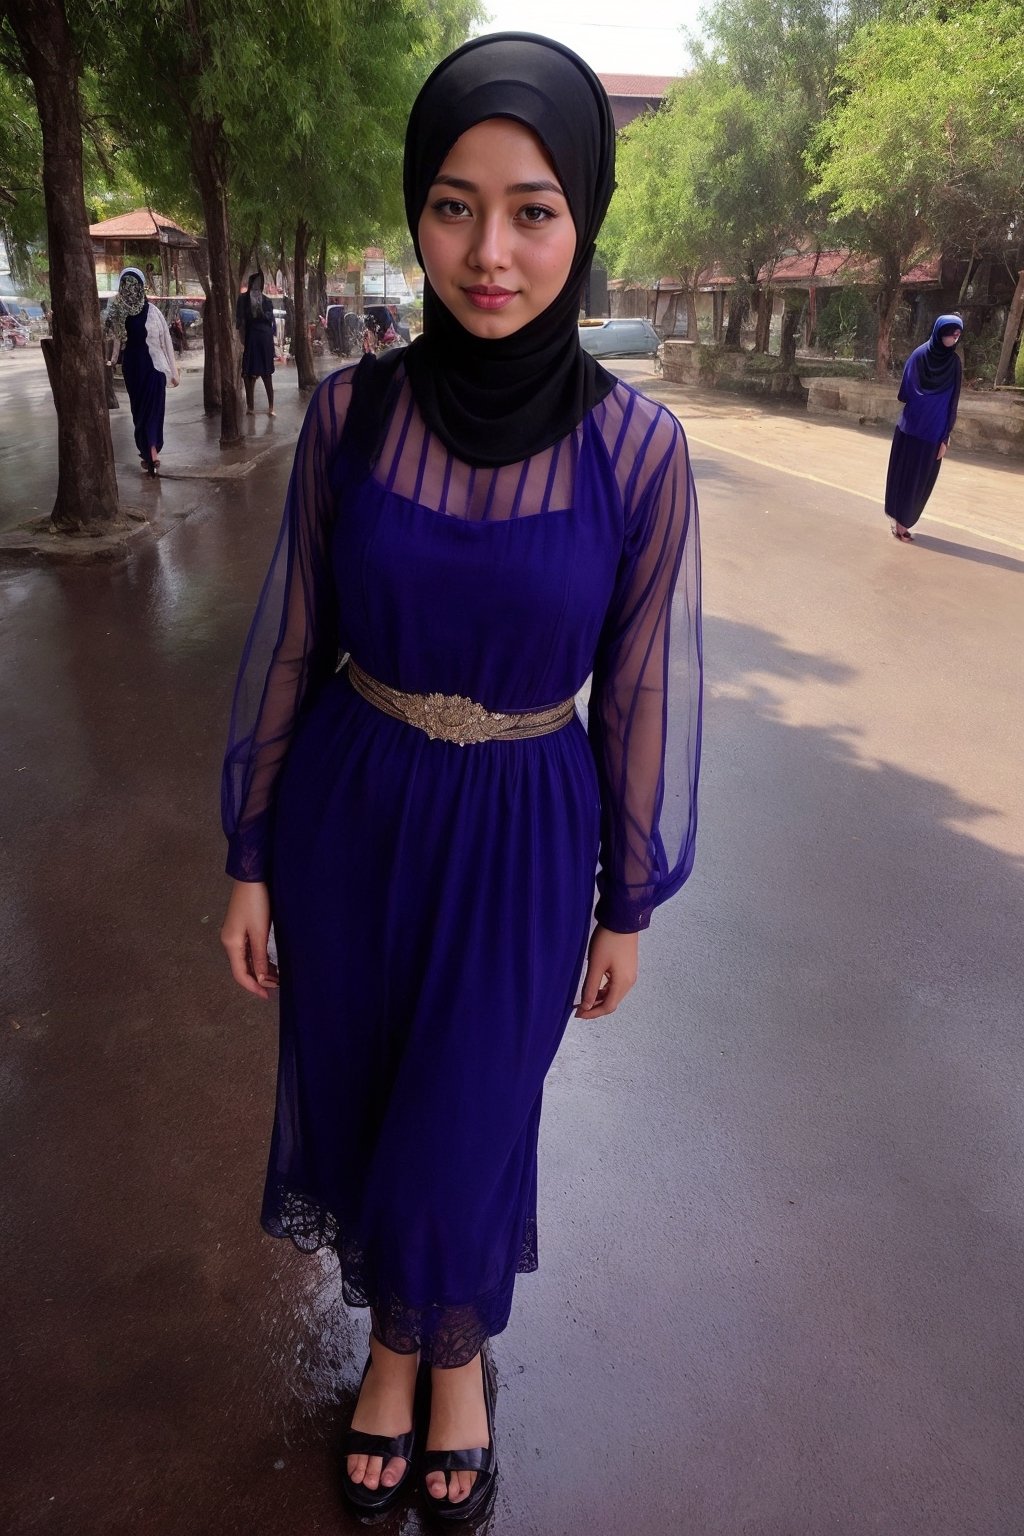 picture from front, ( javanese hijab girl pretty beautiful) ,((wearing a muslim dress transparent)), standing elegant poses, as model, from front, pretty hijab javanese teenage girl, hot,) (people's looking girl)),street place. wet body, romantic girl, innocent, innocent. her body is beautiful,looking at viewer, (cowboy shot) ,(( plumb breasts)), detailed, faint smile, hd, 4k, photoshoot,l,Maya 